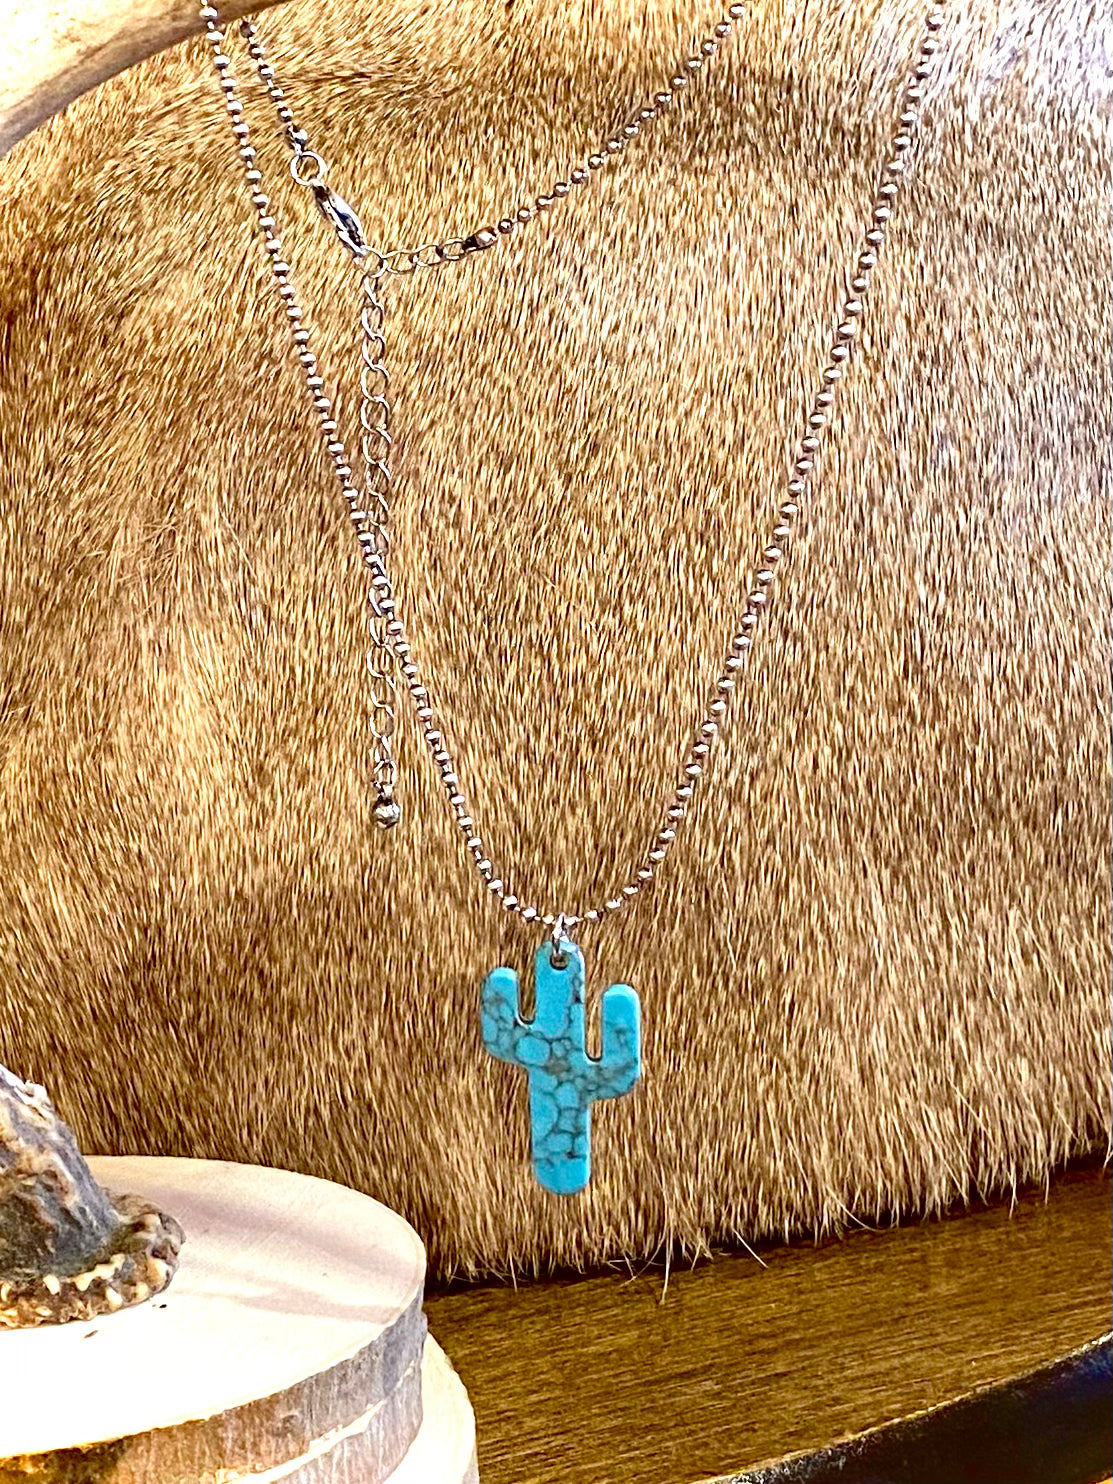 THE SIMPLE TURQUOISE CACTUS - CountryFide Custom Accessories and Outdoors